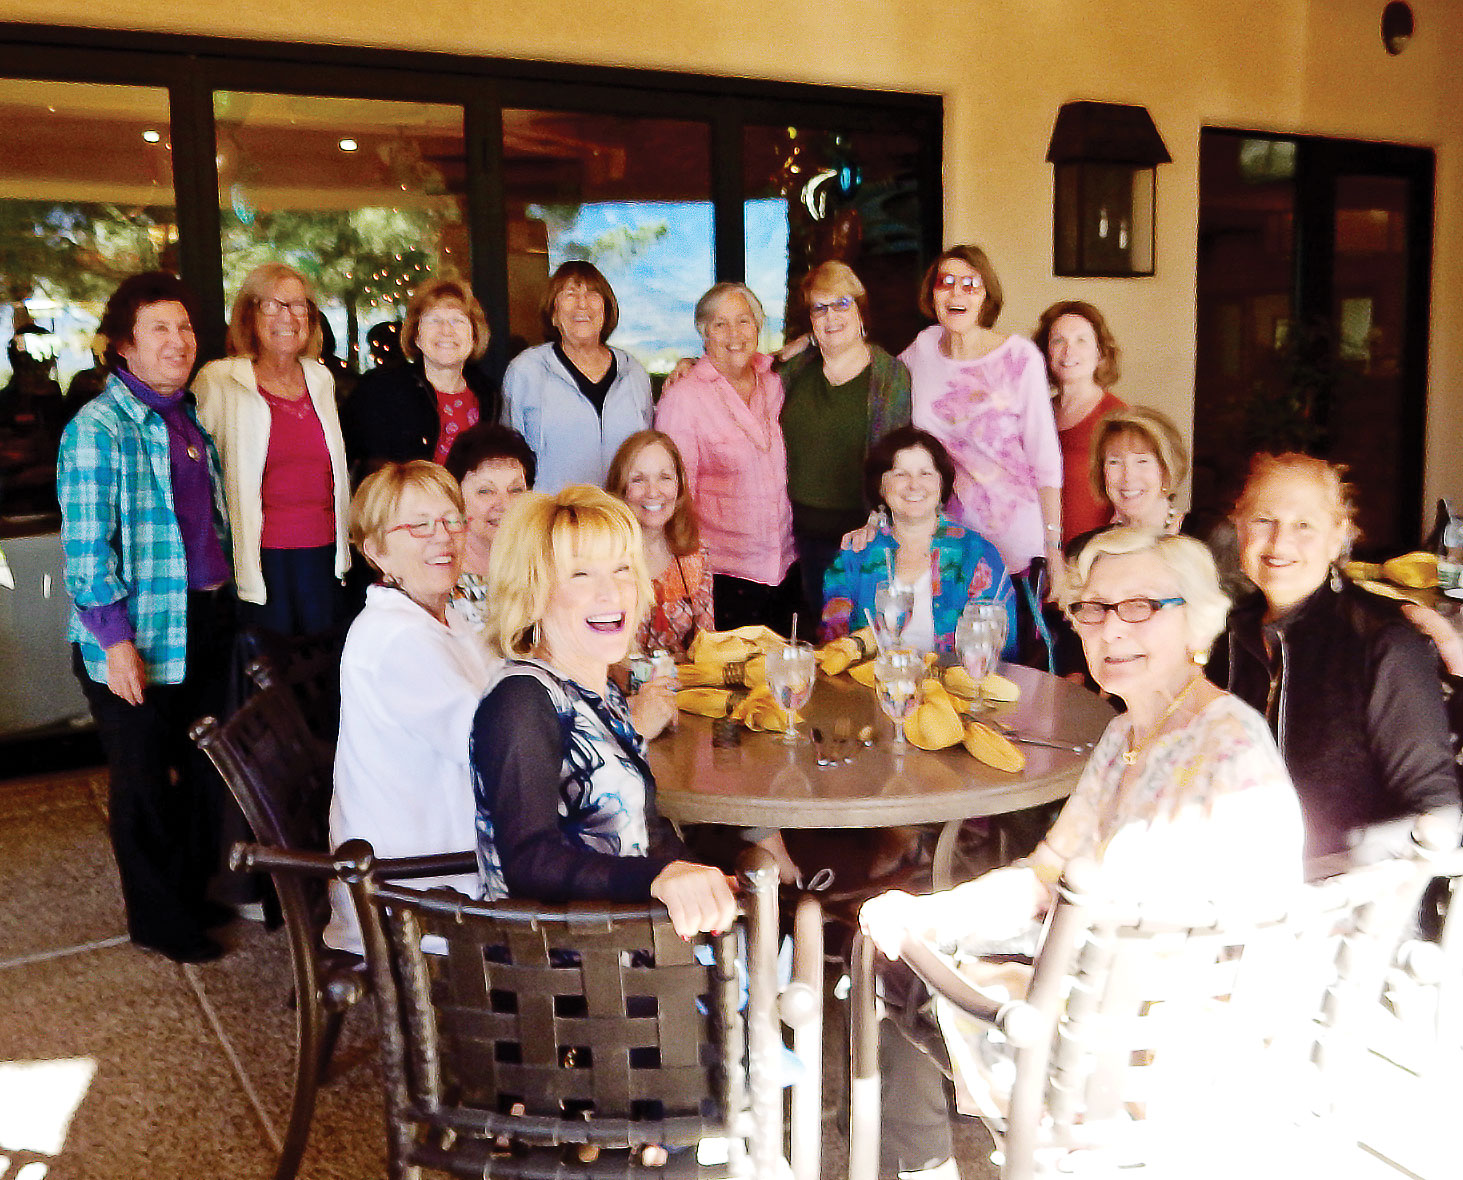 The women of the JFG enjoy their first No-Host Coffee on the Bistro Patio.